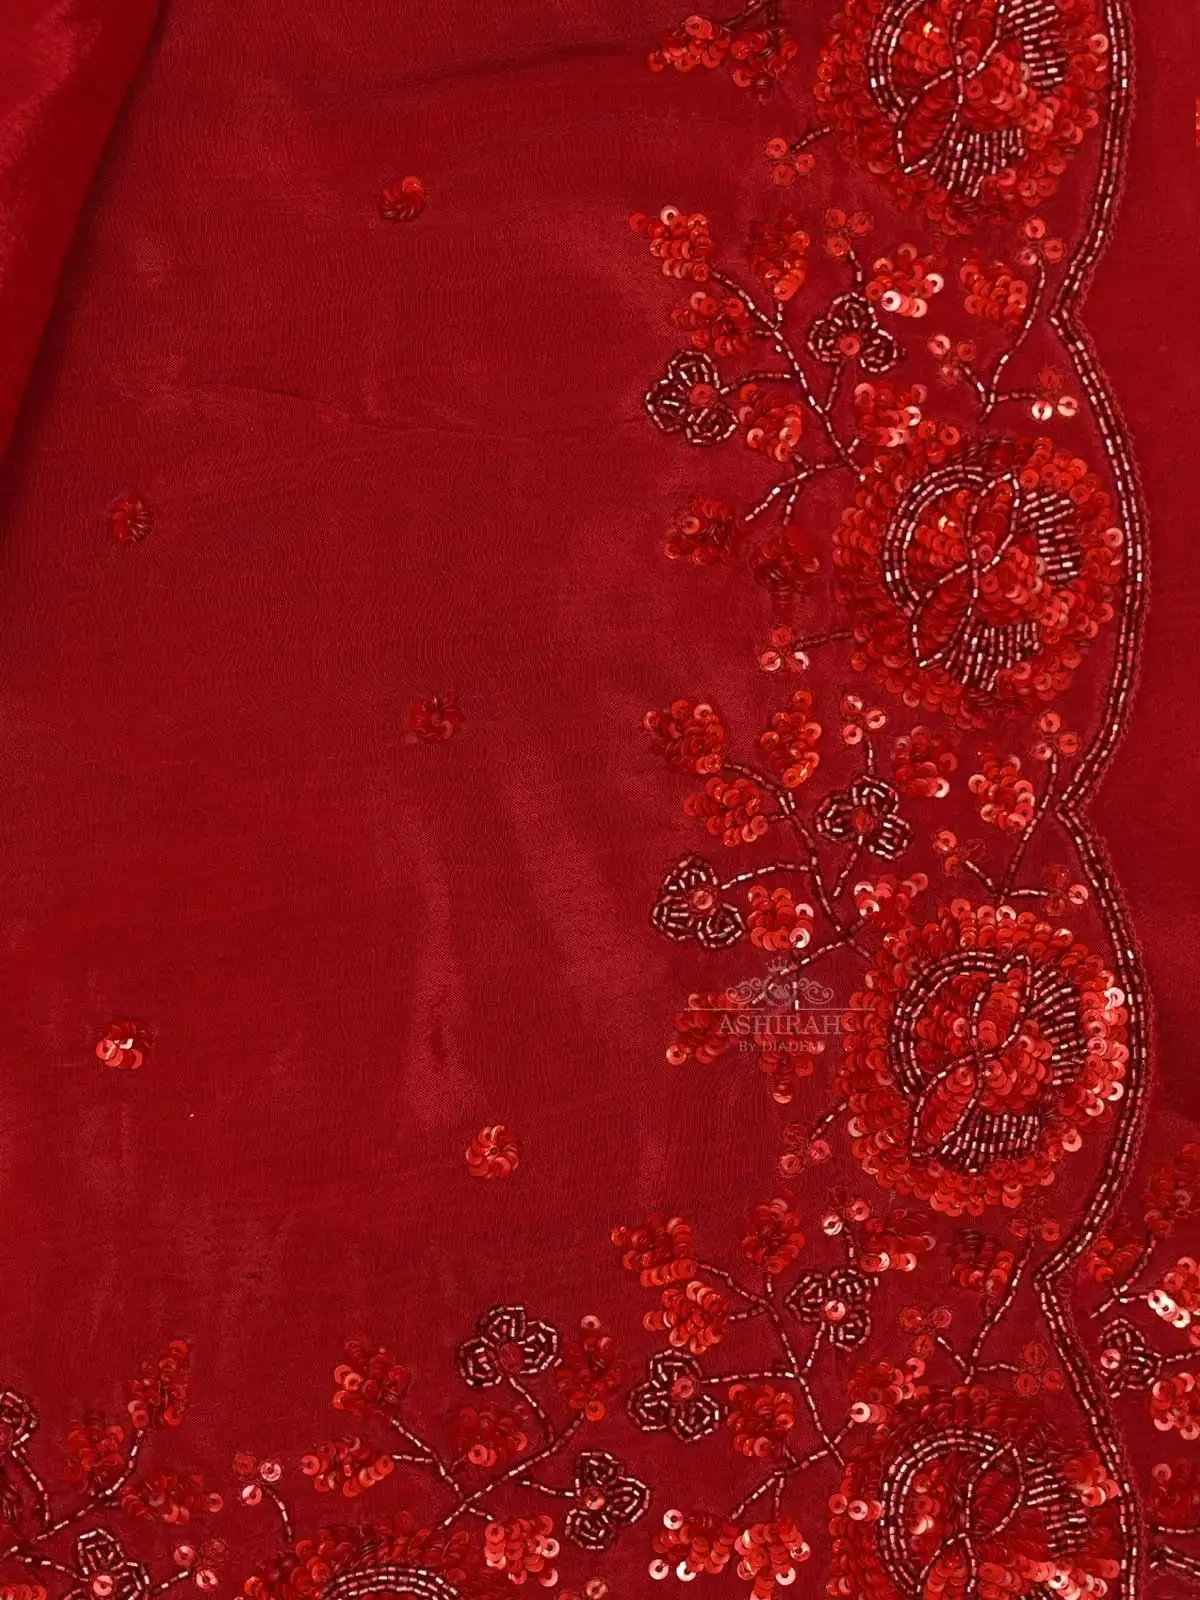 Red Organza Silk Saree Embellished With Floral Embroidery Border